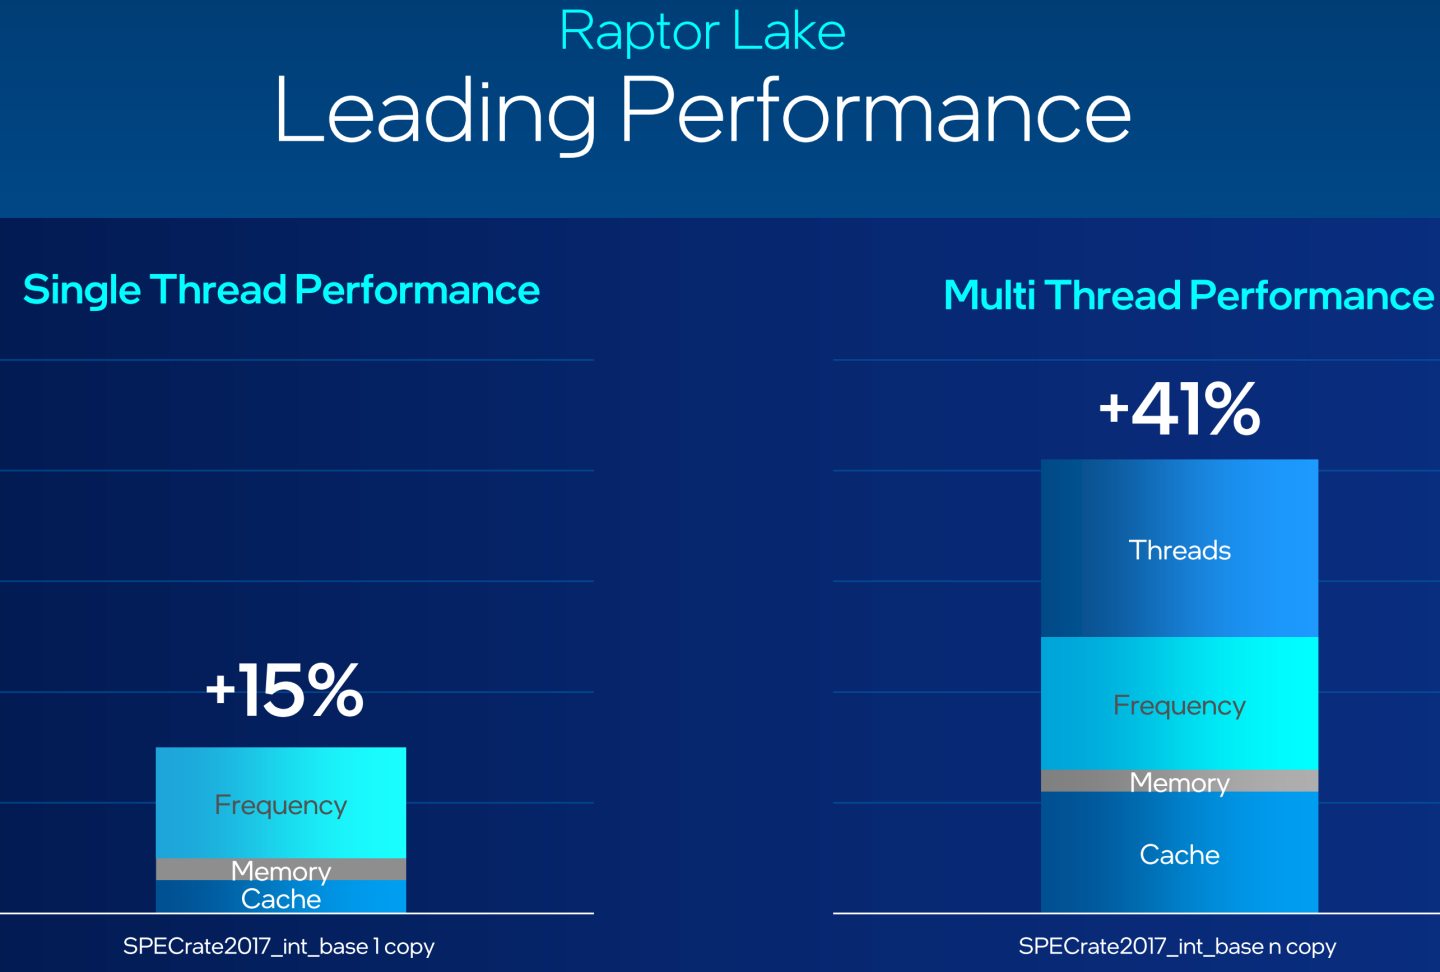 According to the official data provided by Intel, Raptor Lake is 15% higher than the previous generation single-threaded performance, and multi-threaded is as high as 41%. The performance gain comes from the contribution of cache memory, system main memory, clock, and E-Core growth.